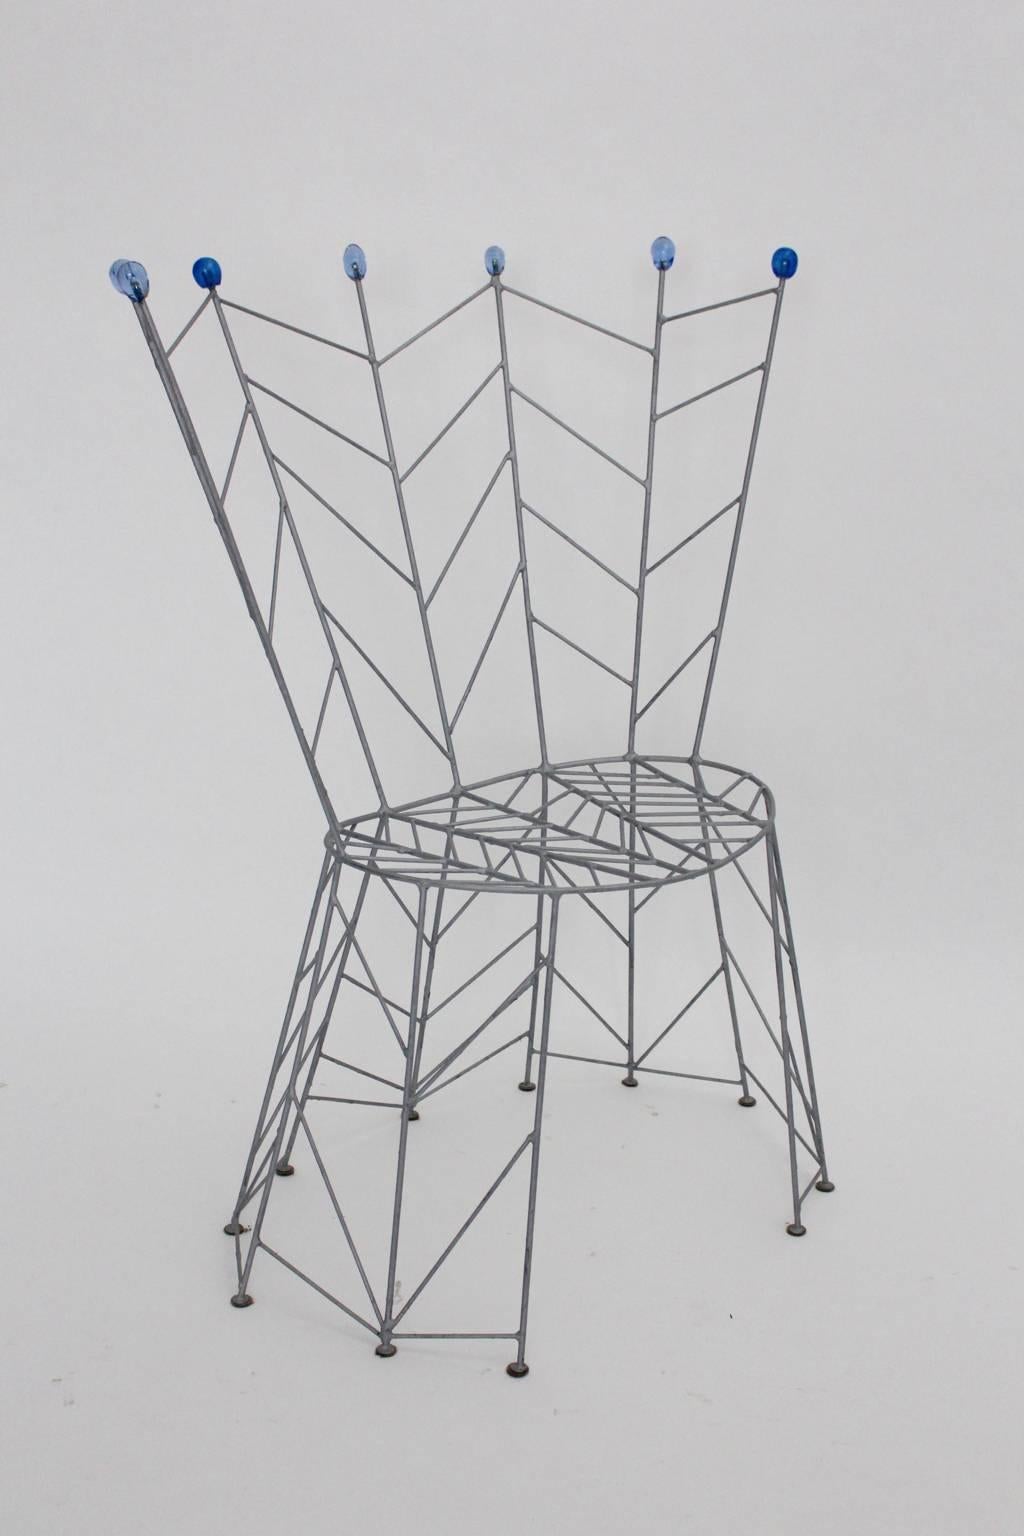 Postmodern sculptural metal blue blown glass vintage side chair or chair designed by Bohuslav Horak, 1988, Czech Republic.
He worked with the artist group Atika ( 1987-1992).
Bohulav Horak outstanding design creations are utensils, which become to